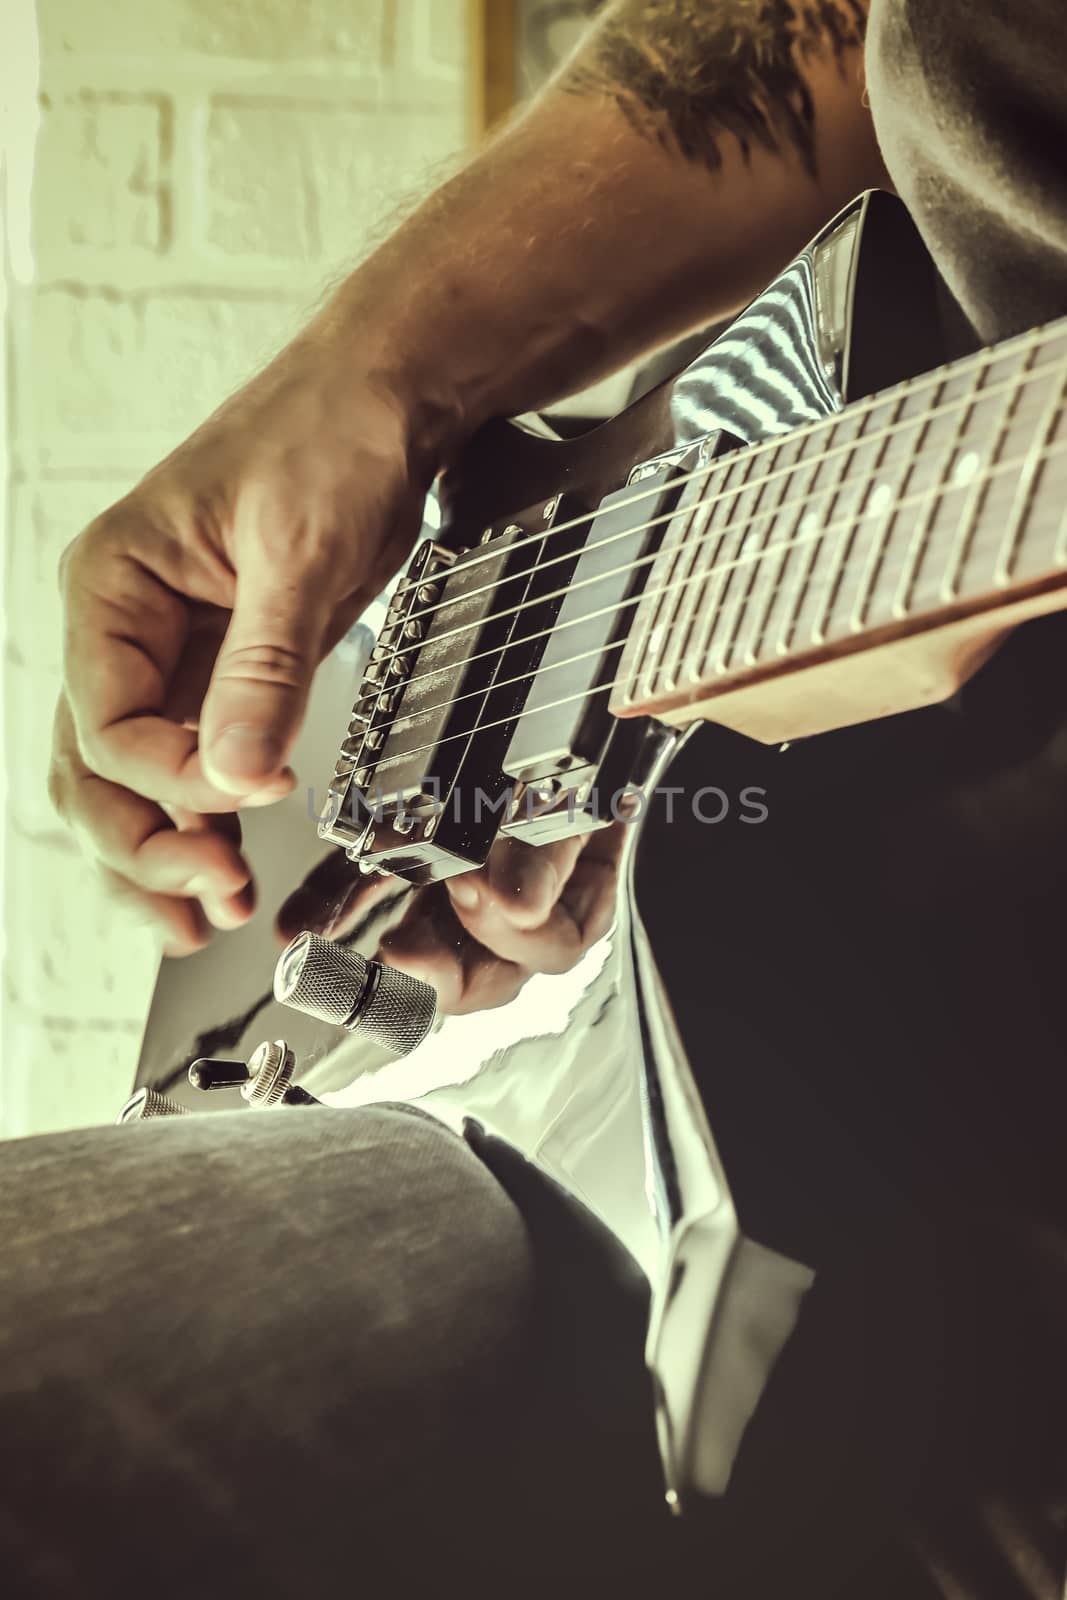 Musical lifestyle background. Playing the guitar. Guitarist's hand dynamic motion. Macro closeup. by sanches812